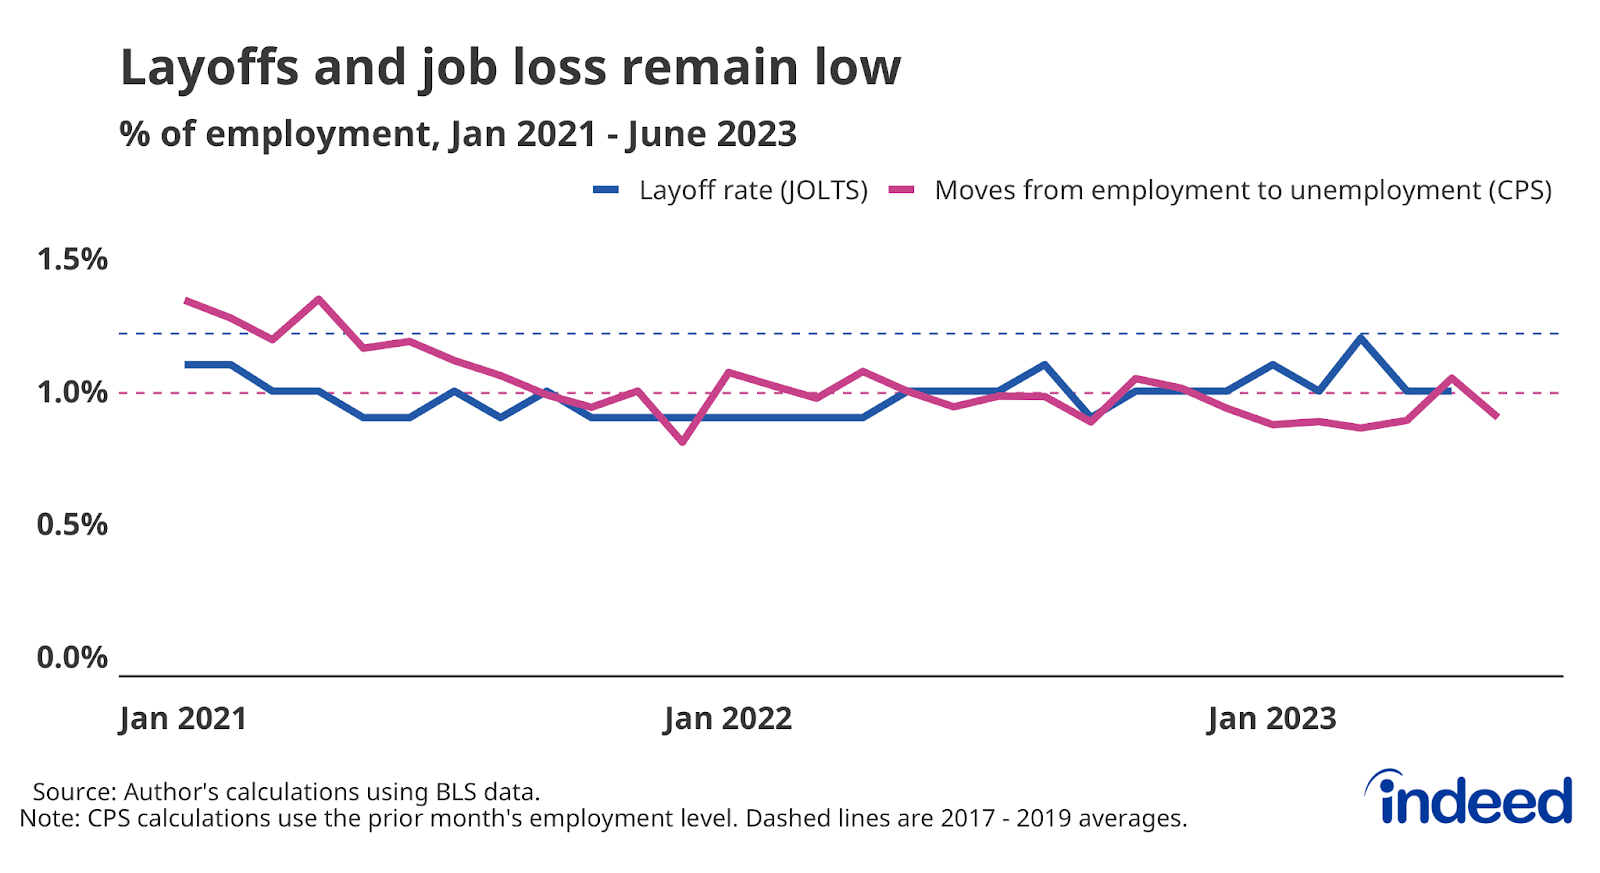 Line graph titled “Layoffs and job loss remain low” with a vertical axis ranging from 0% to 1.5%, covering January 2021 to June 2023. The graph shows two measures of worker job-loss rates remaining at low levels throughout 2022 and into 2023.